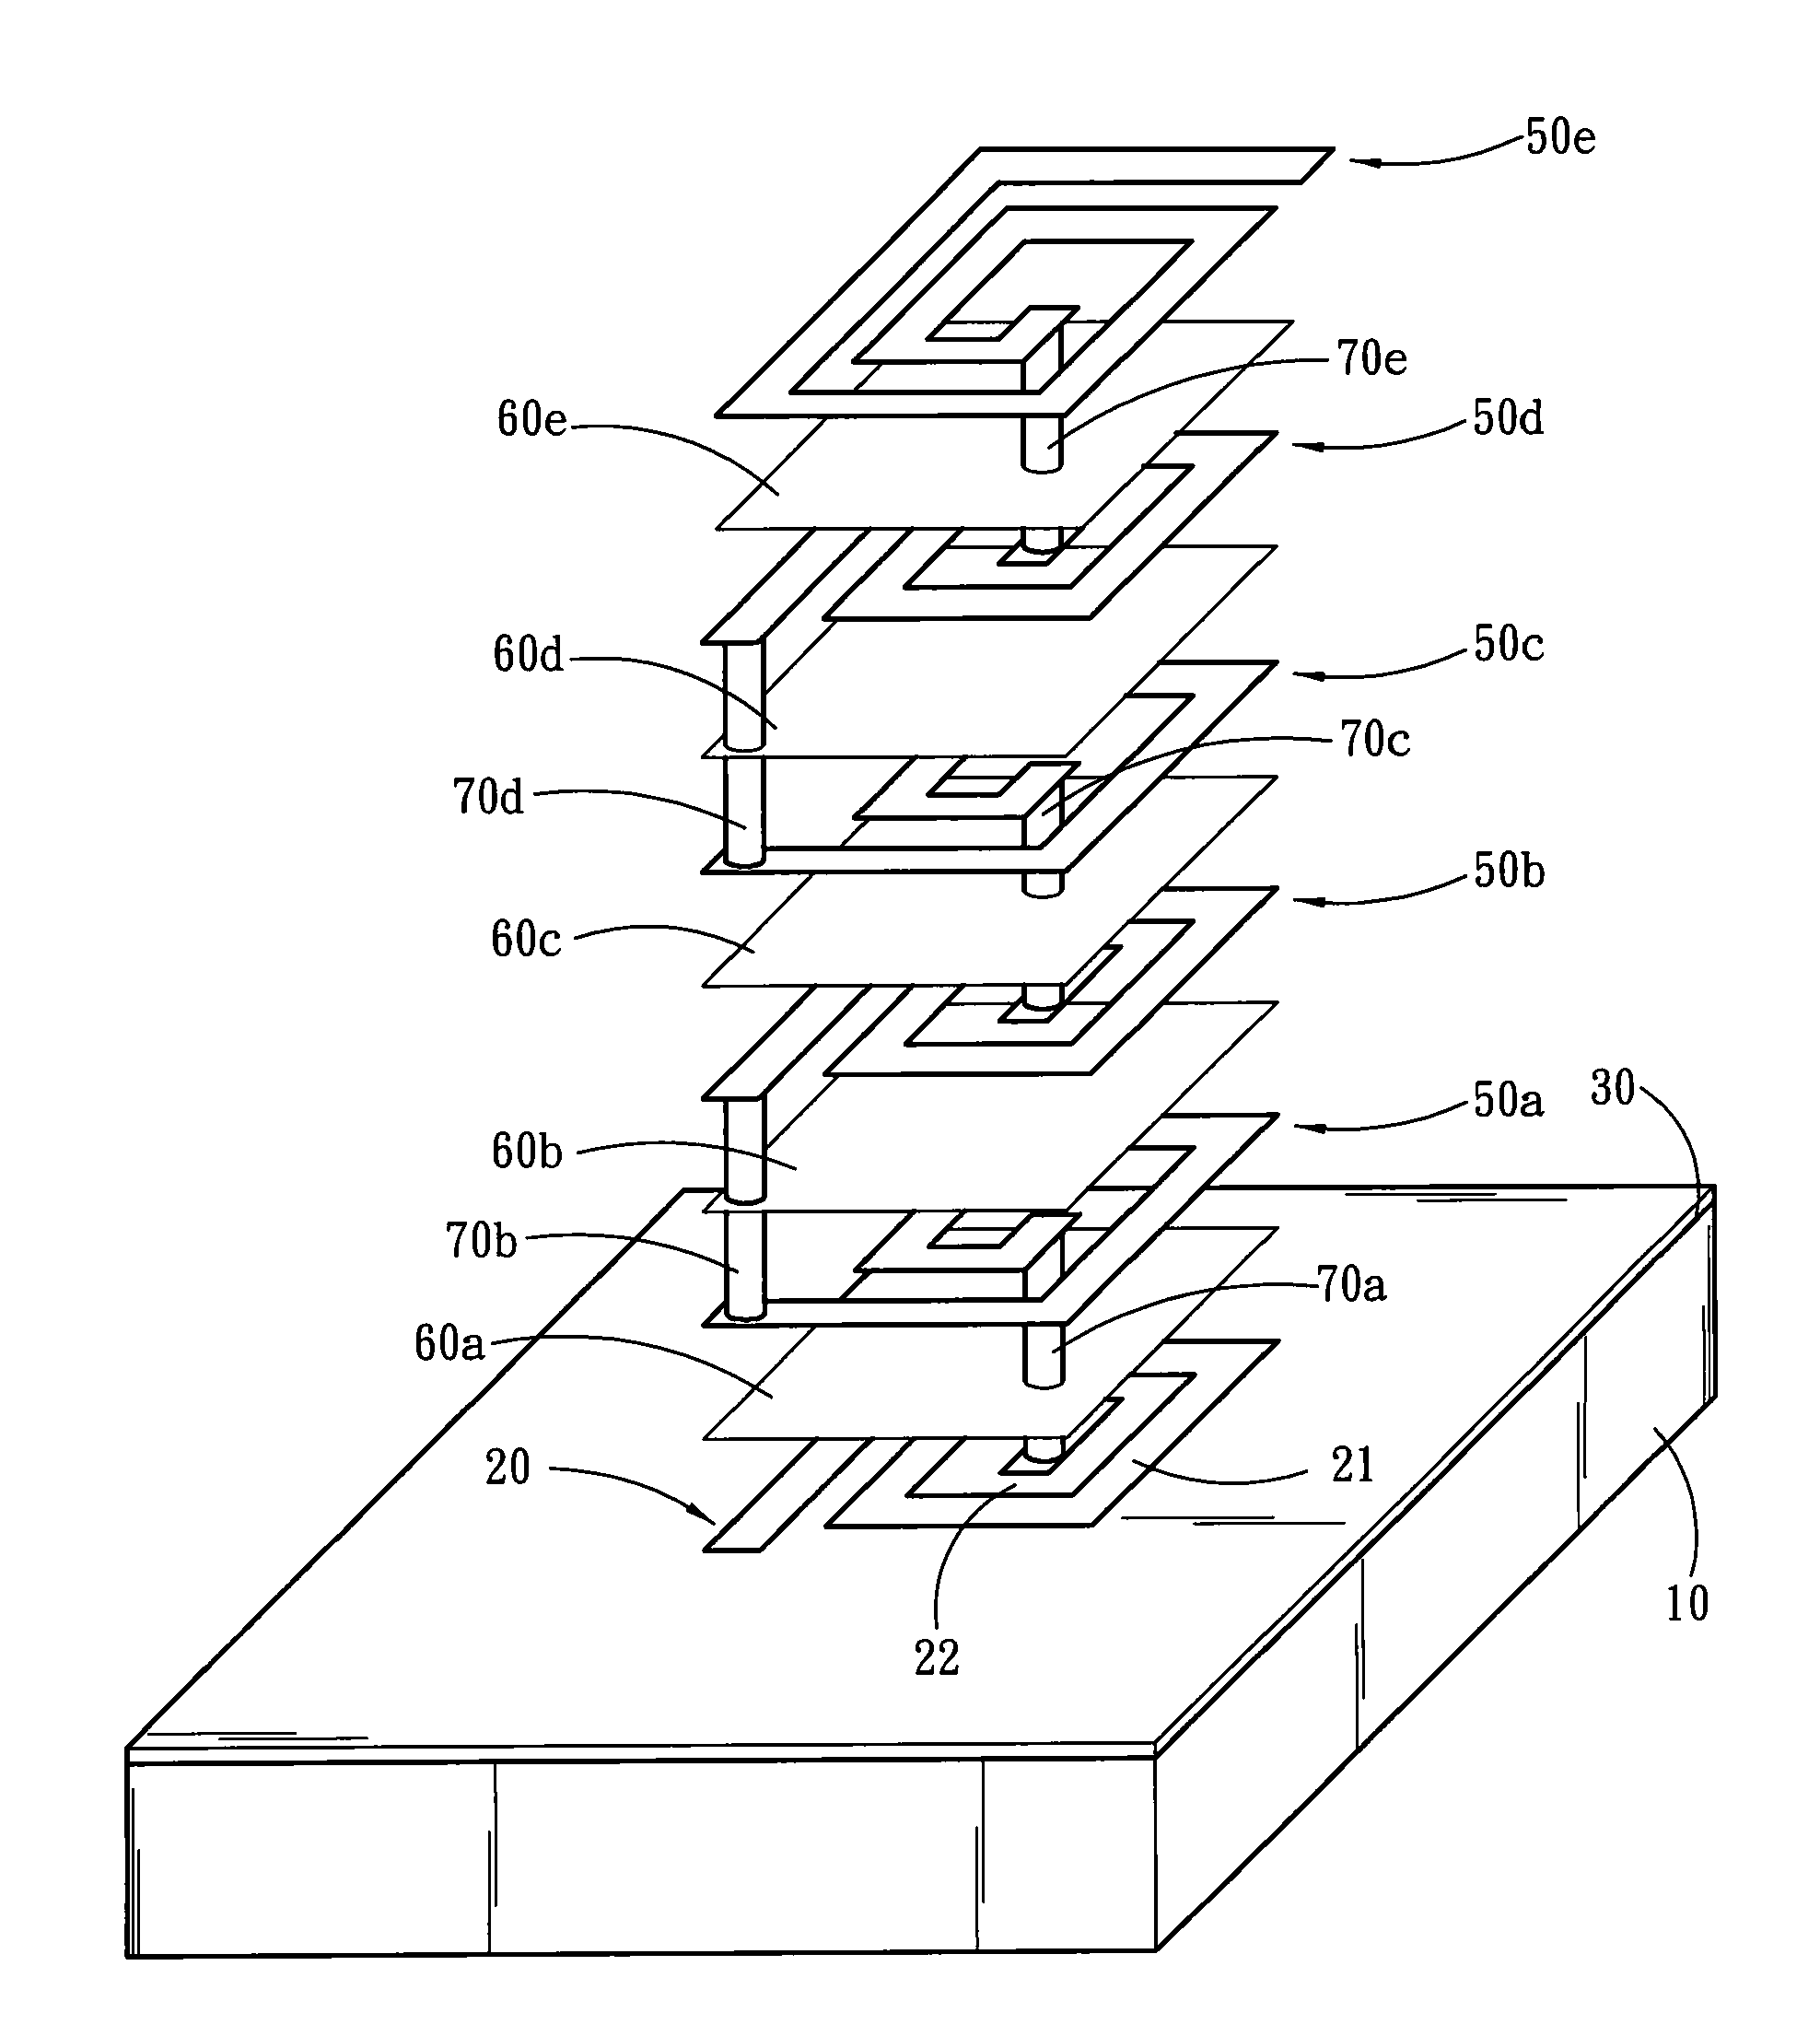 Inductor structure